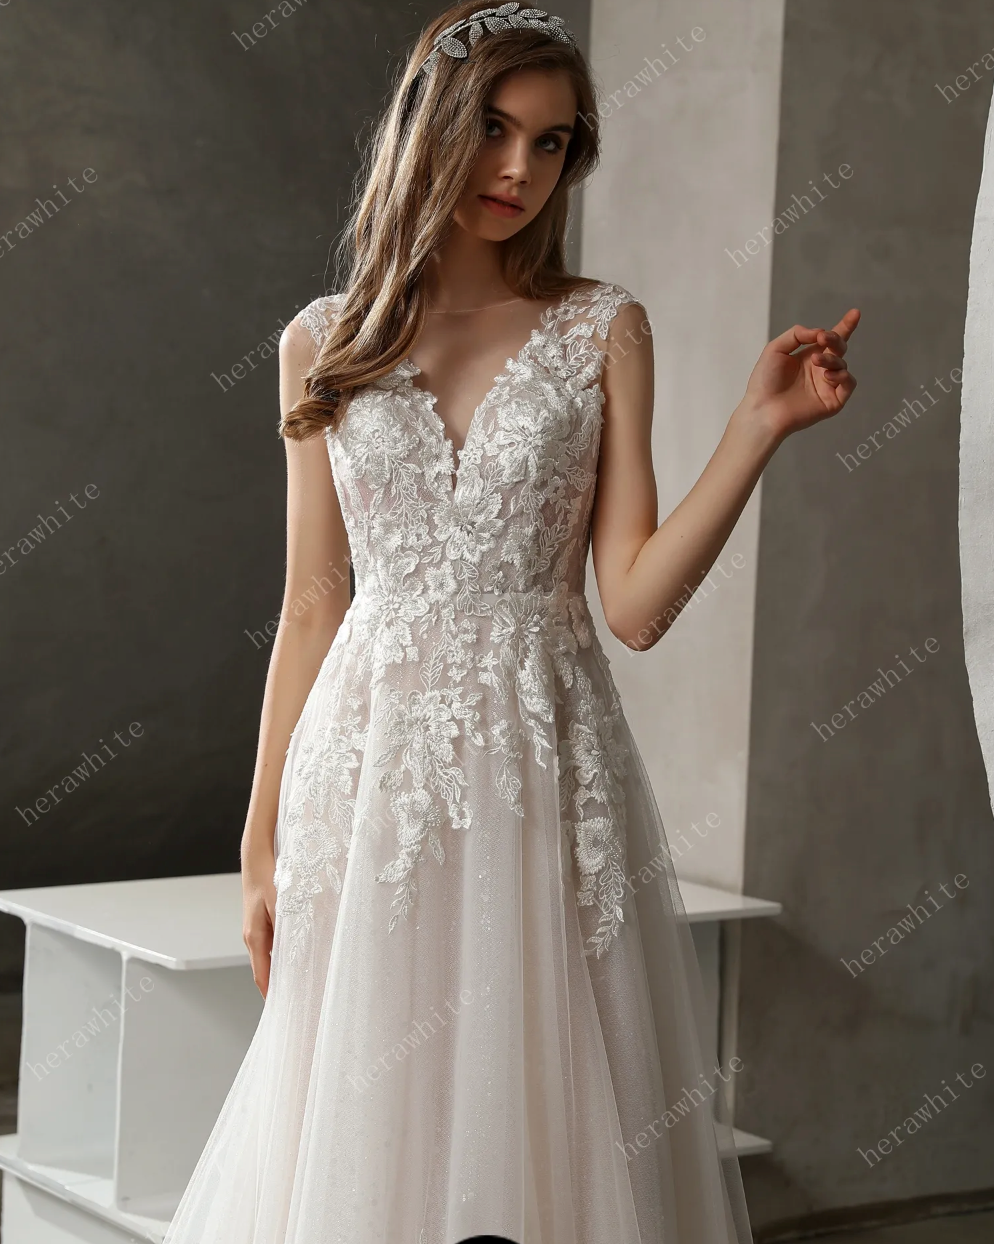 Load image into Gallery viewer, Sparkly Tulle and Lace A-Line Bridal Gown with Bateau Neckline
